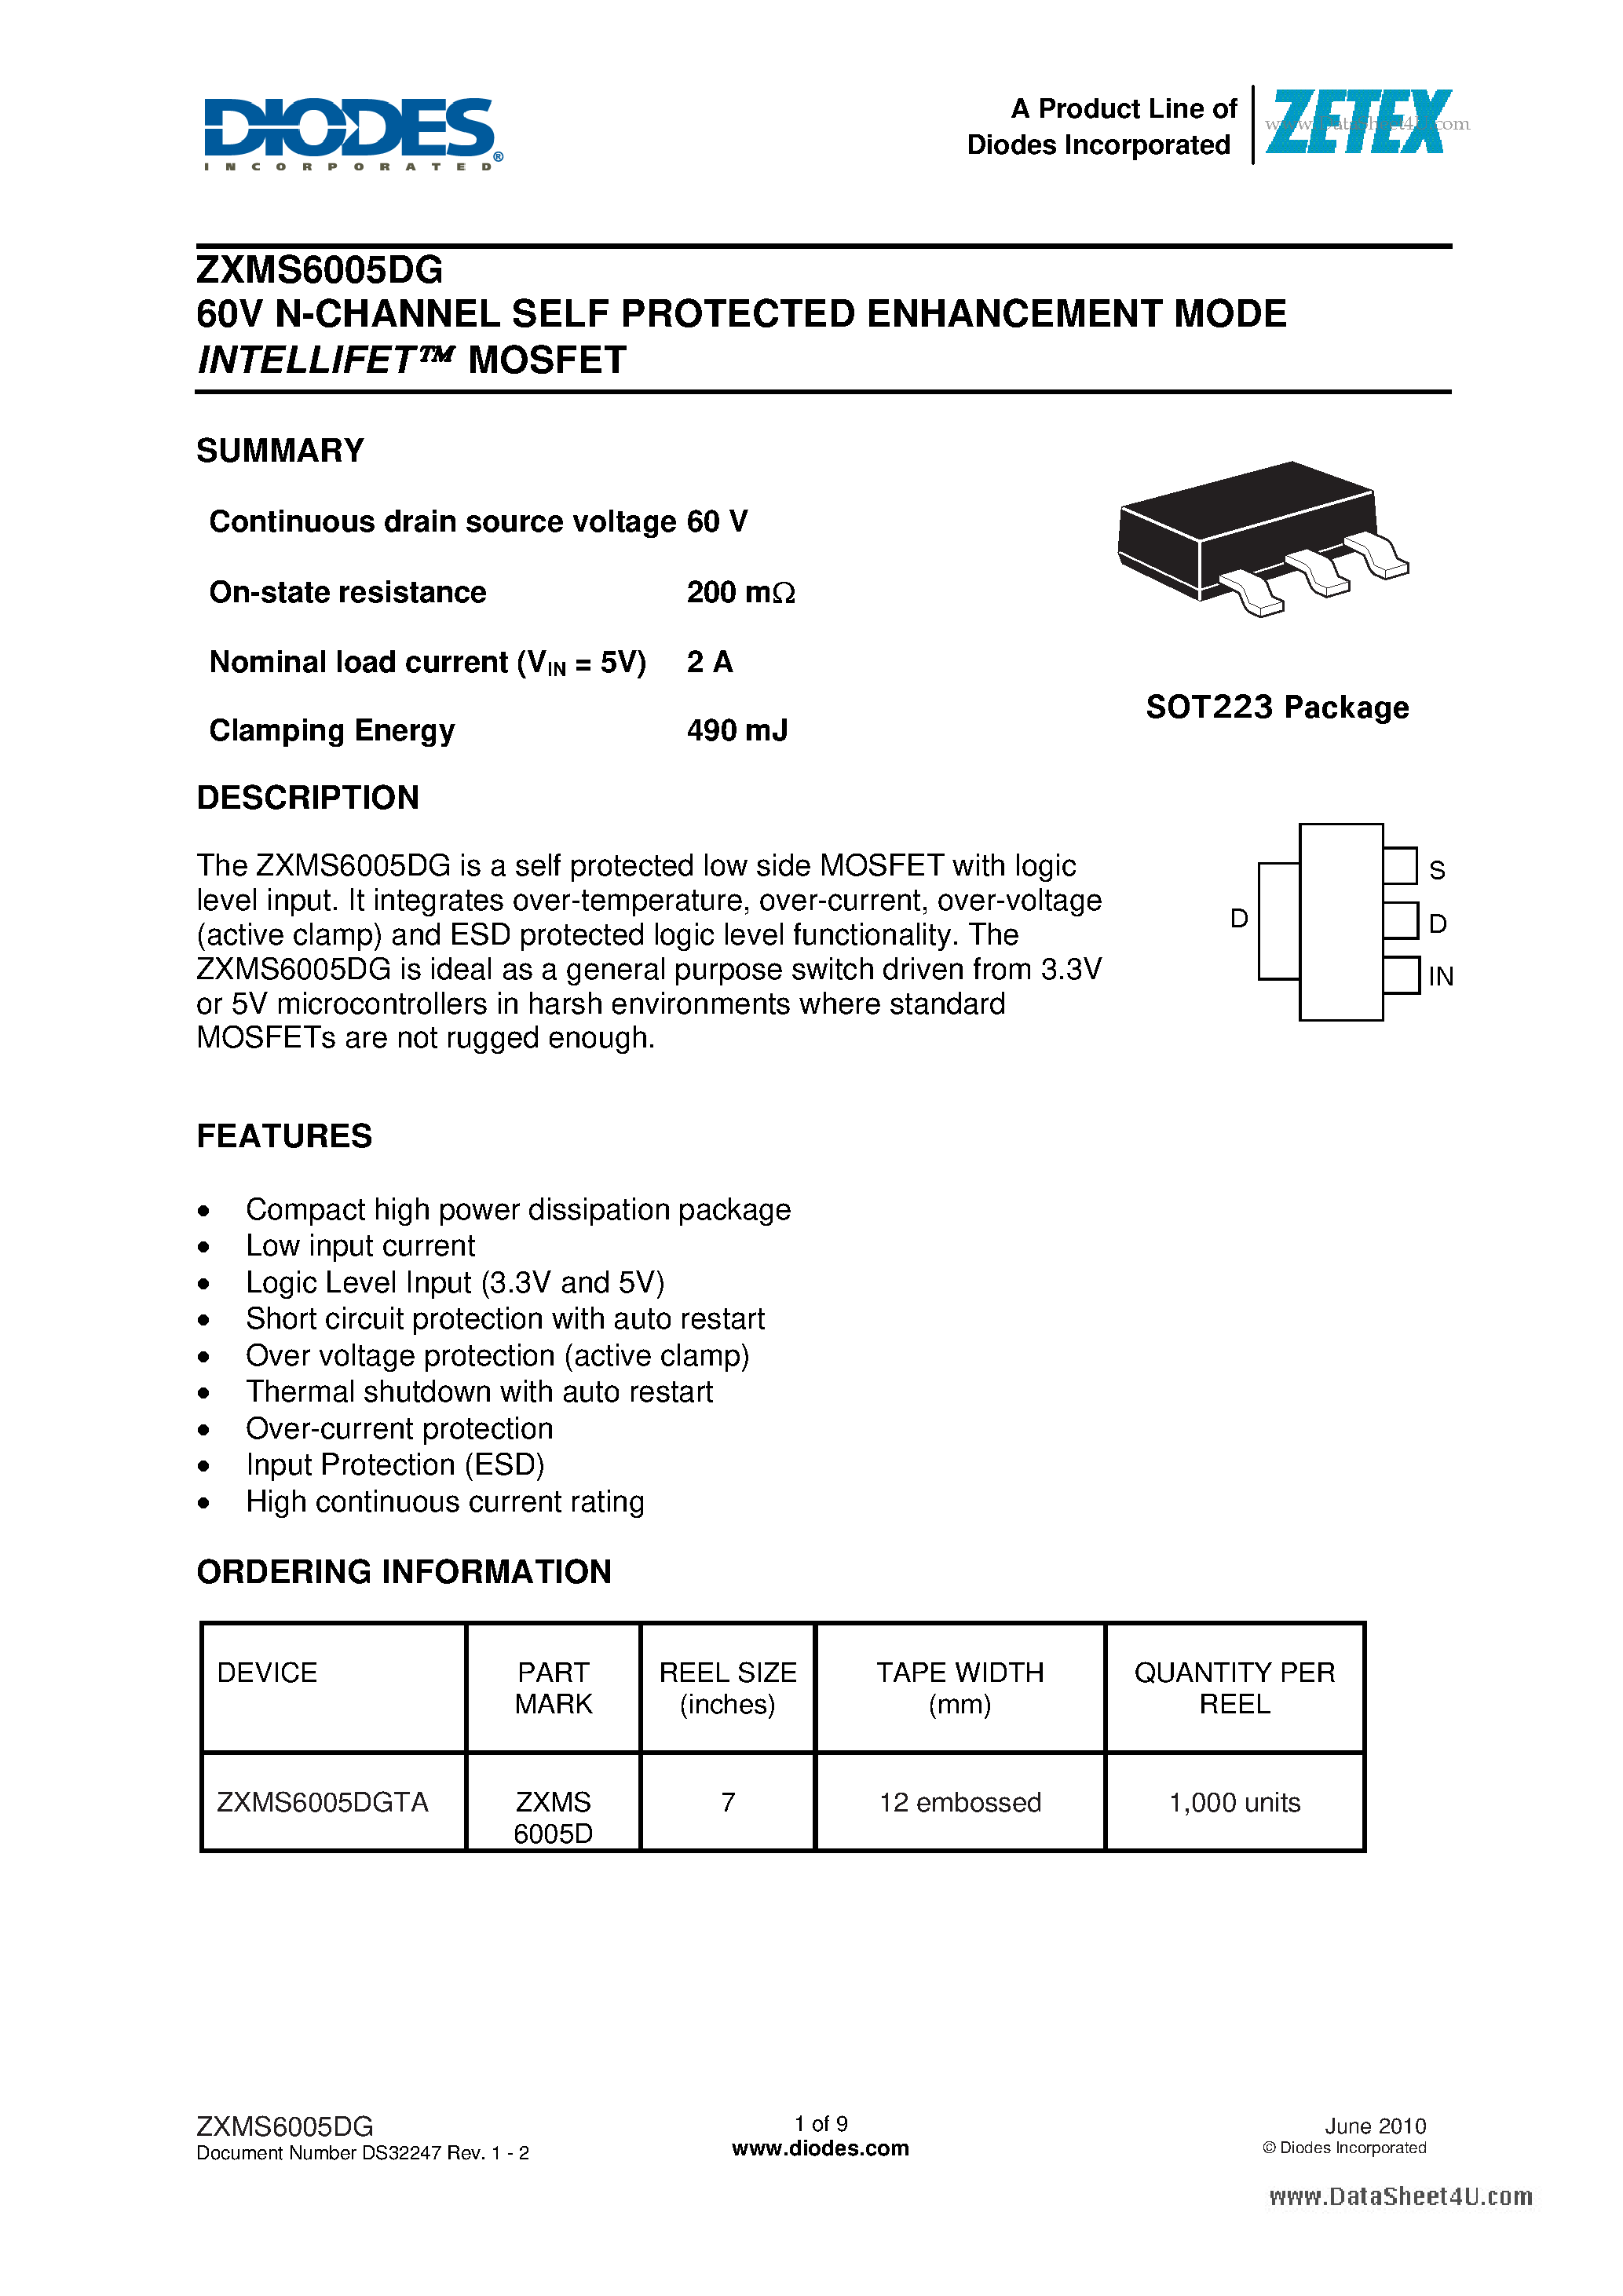 Datasheet ZXMS6005DG - 60V N-CHANNEL SELF PROTECTED ENHANCEMENT MODE page 1